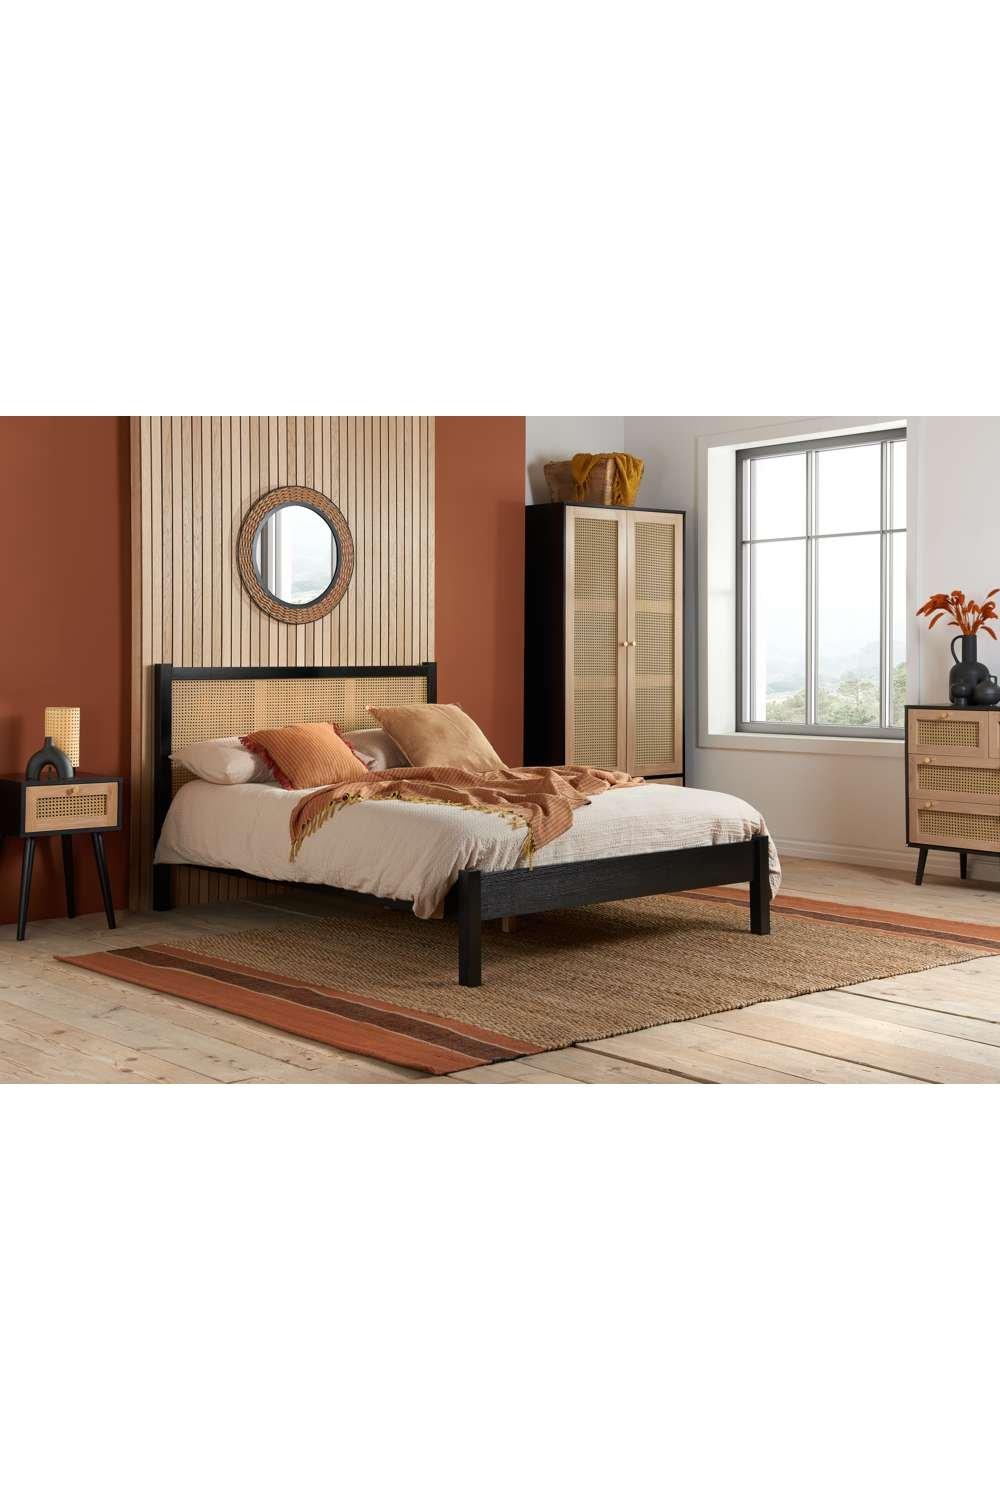 Croxley King Rattan Bed Brown